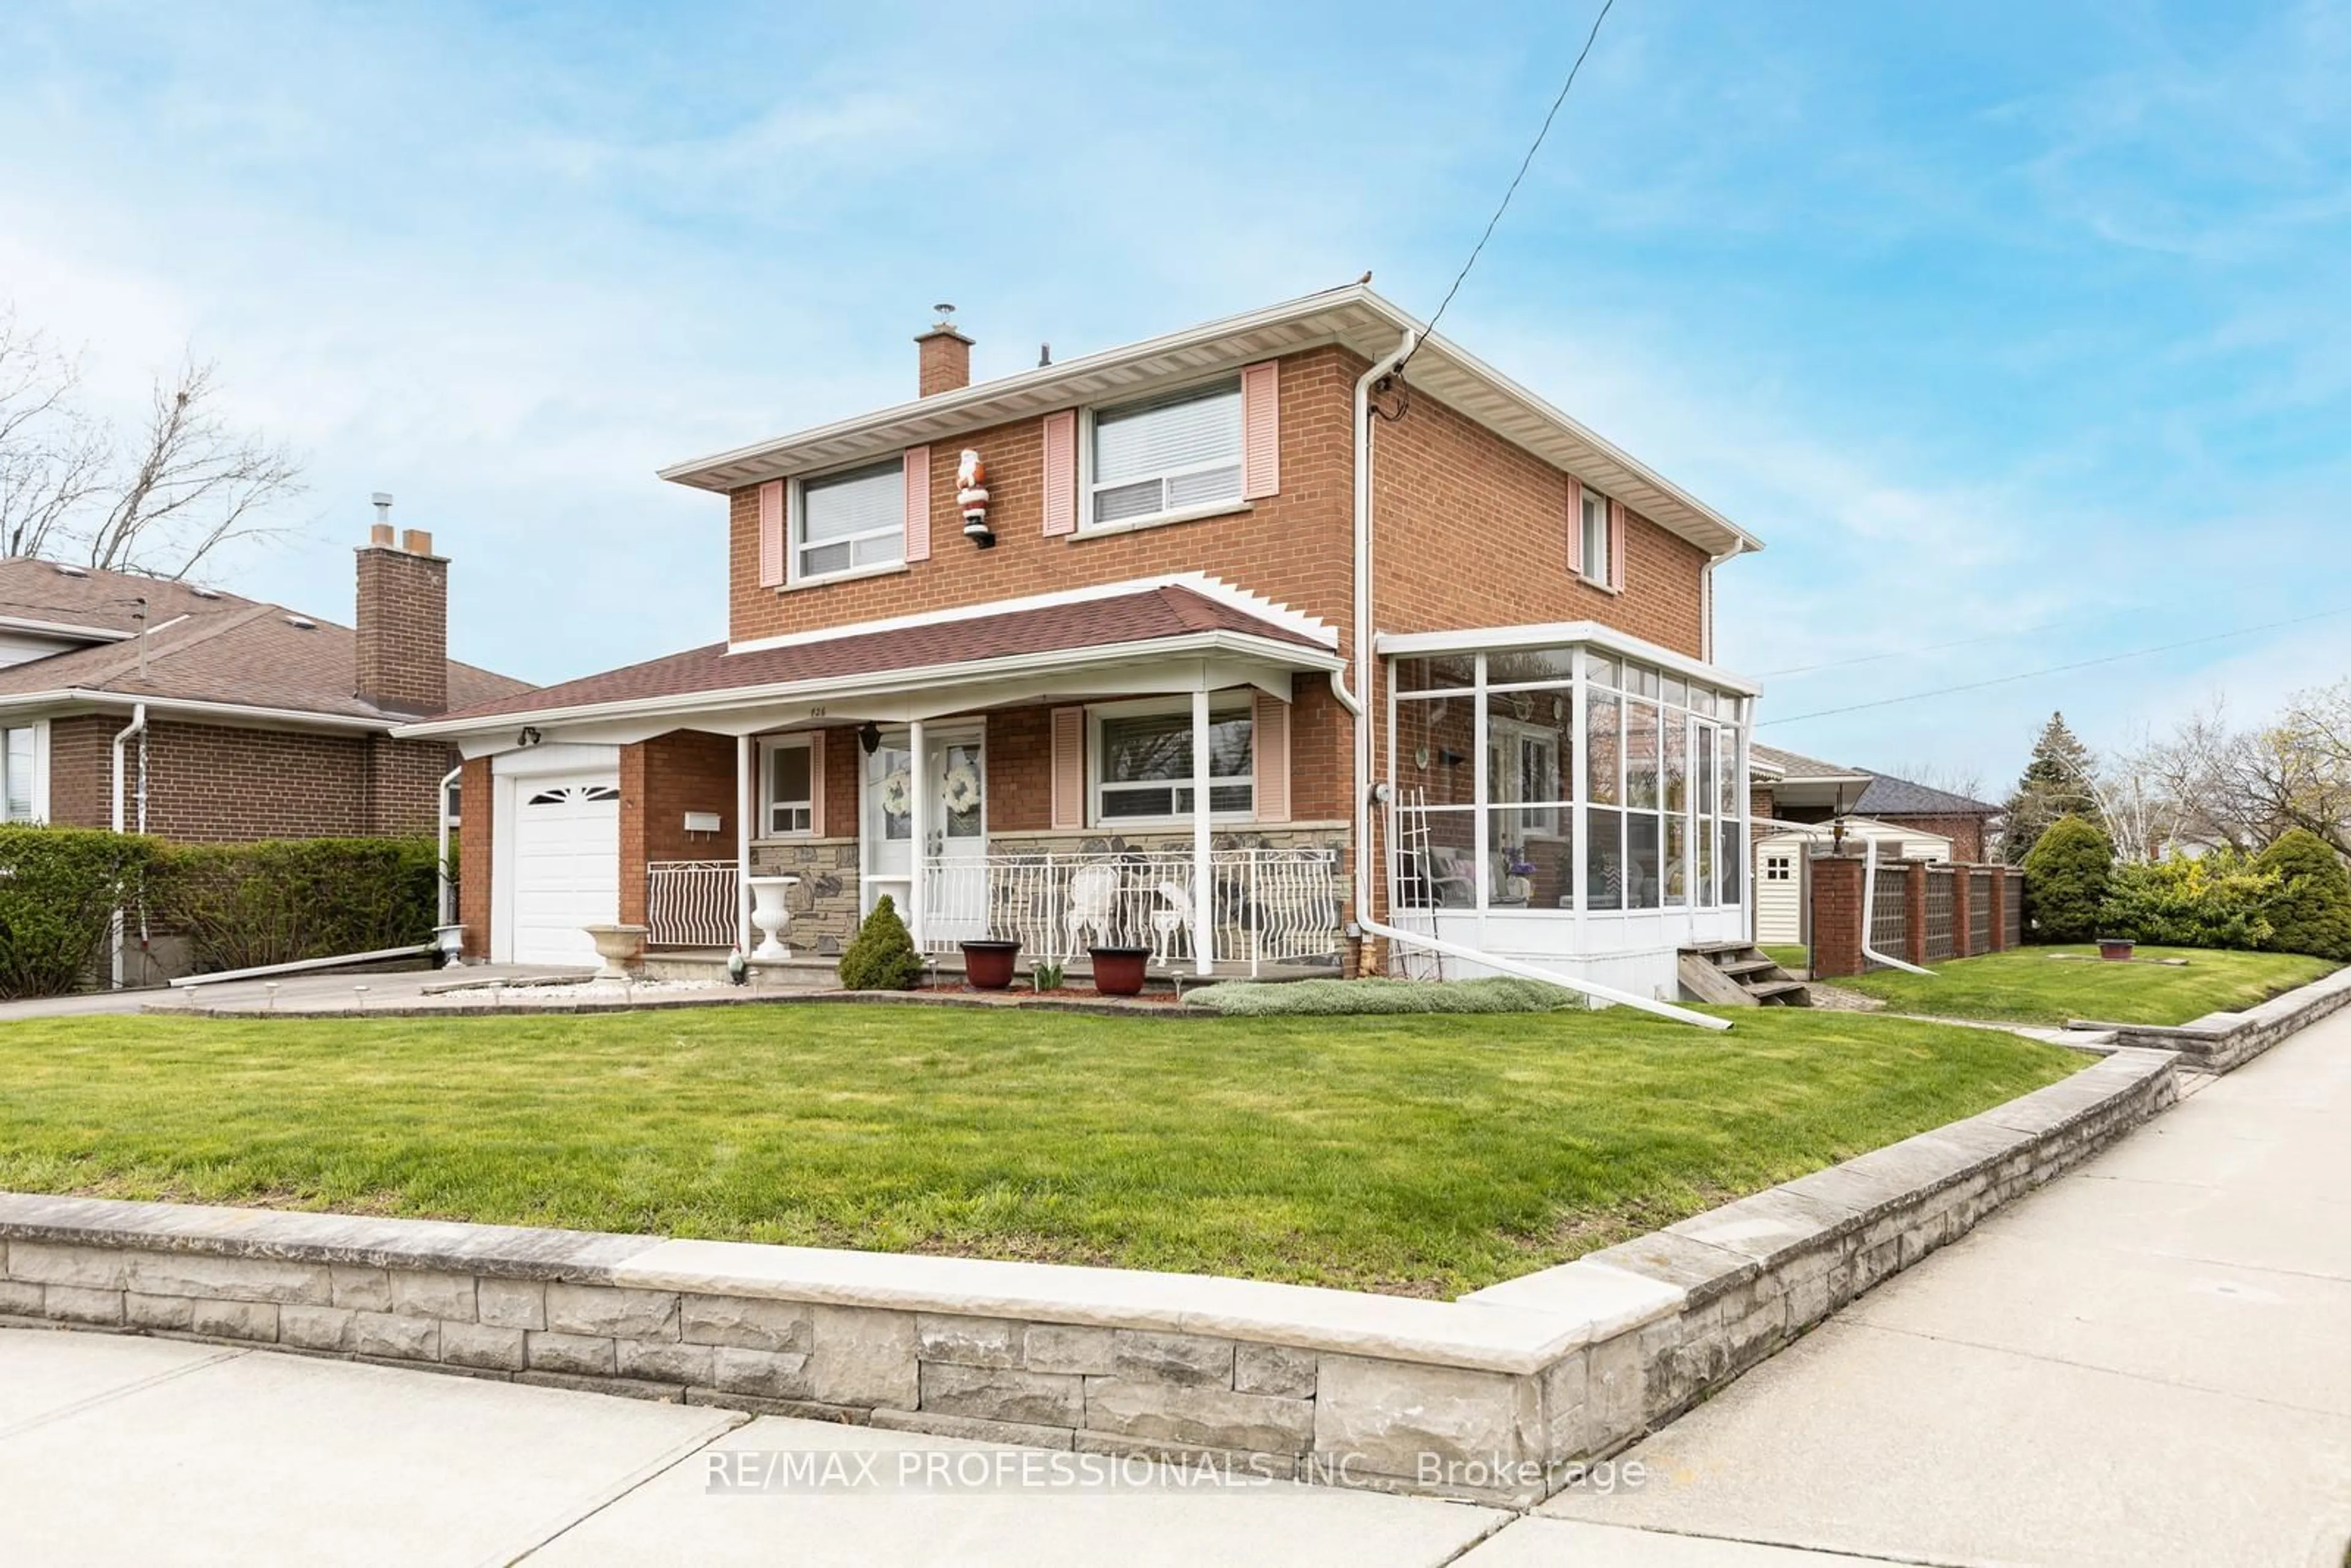 Home with brick exterior material for 426 Renforth Dr, Toronto Ontario M9C 2M7